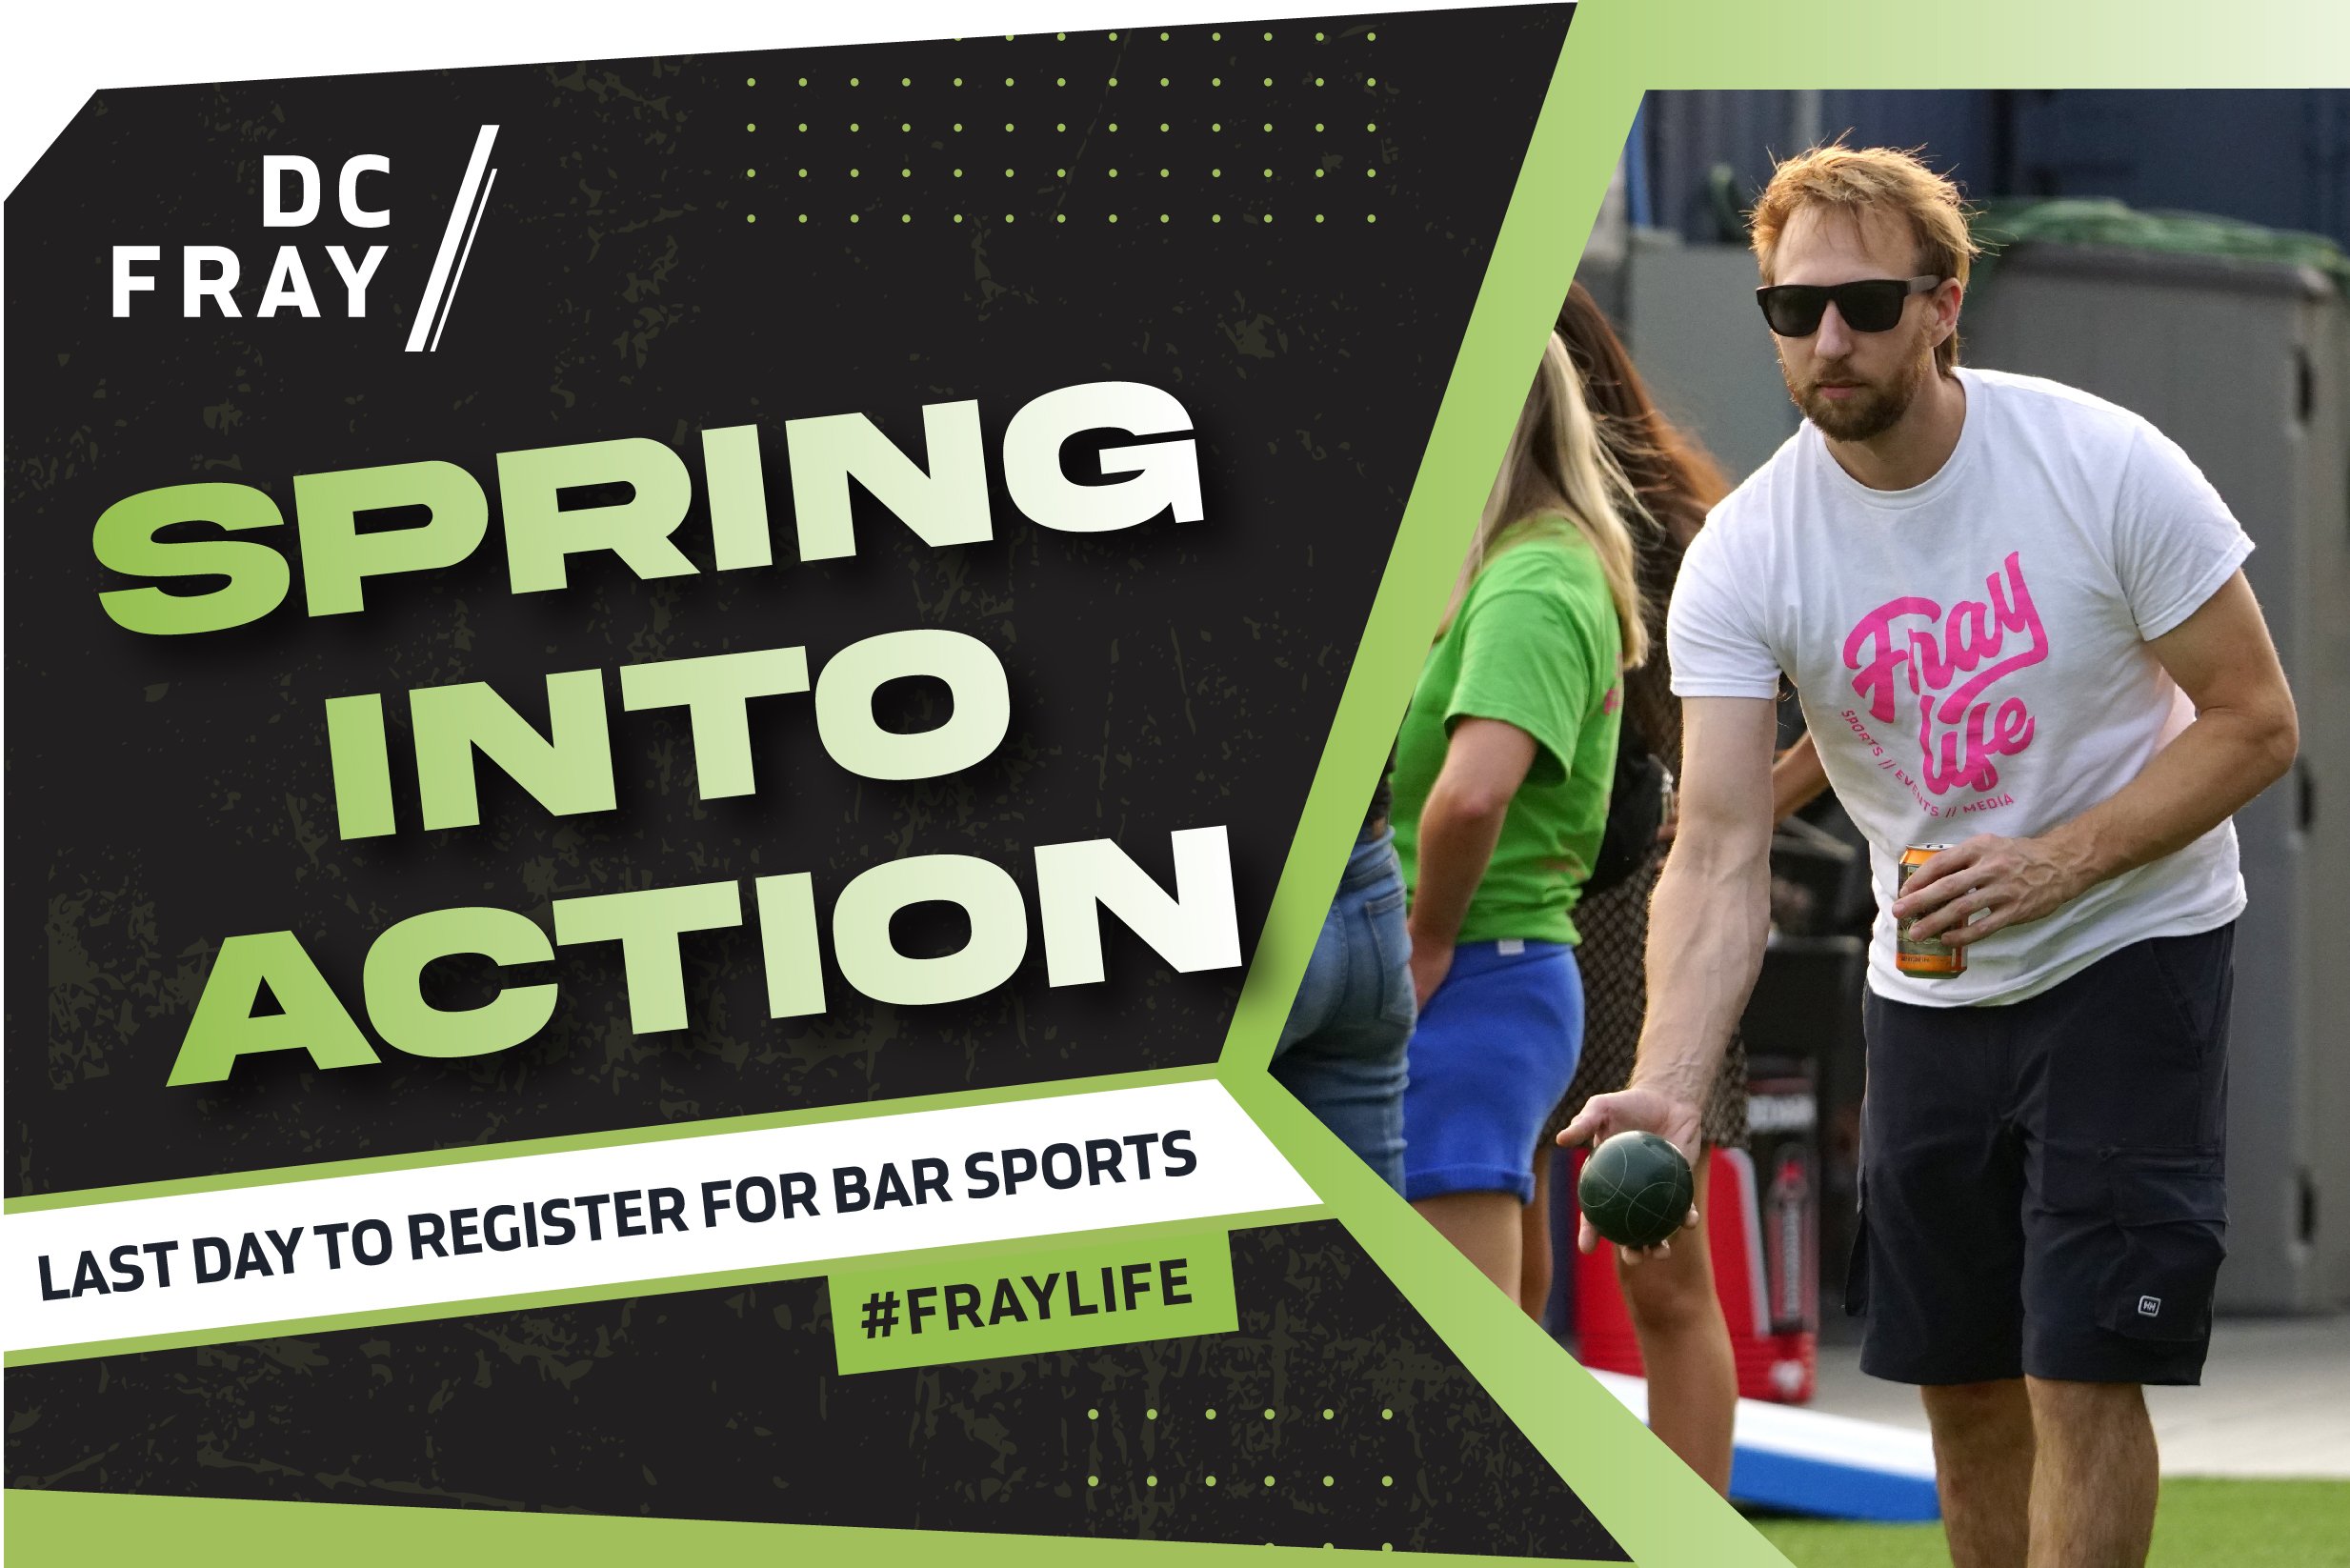 Last Day to Register for Spring Bar Sport Leagues